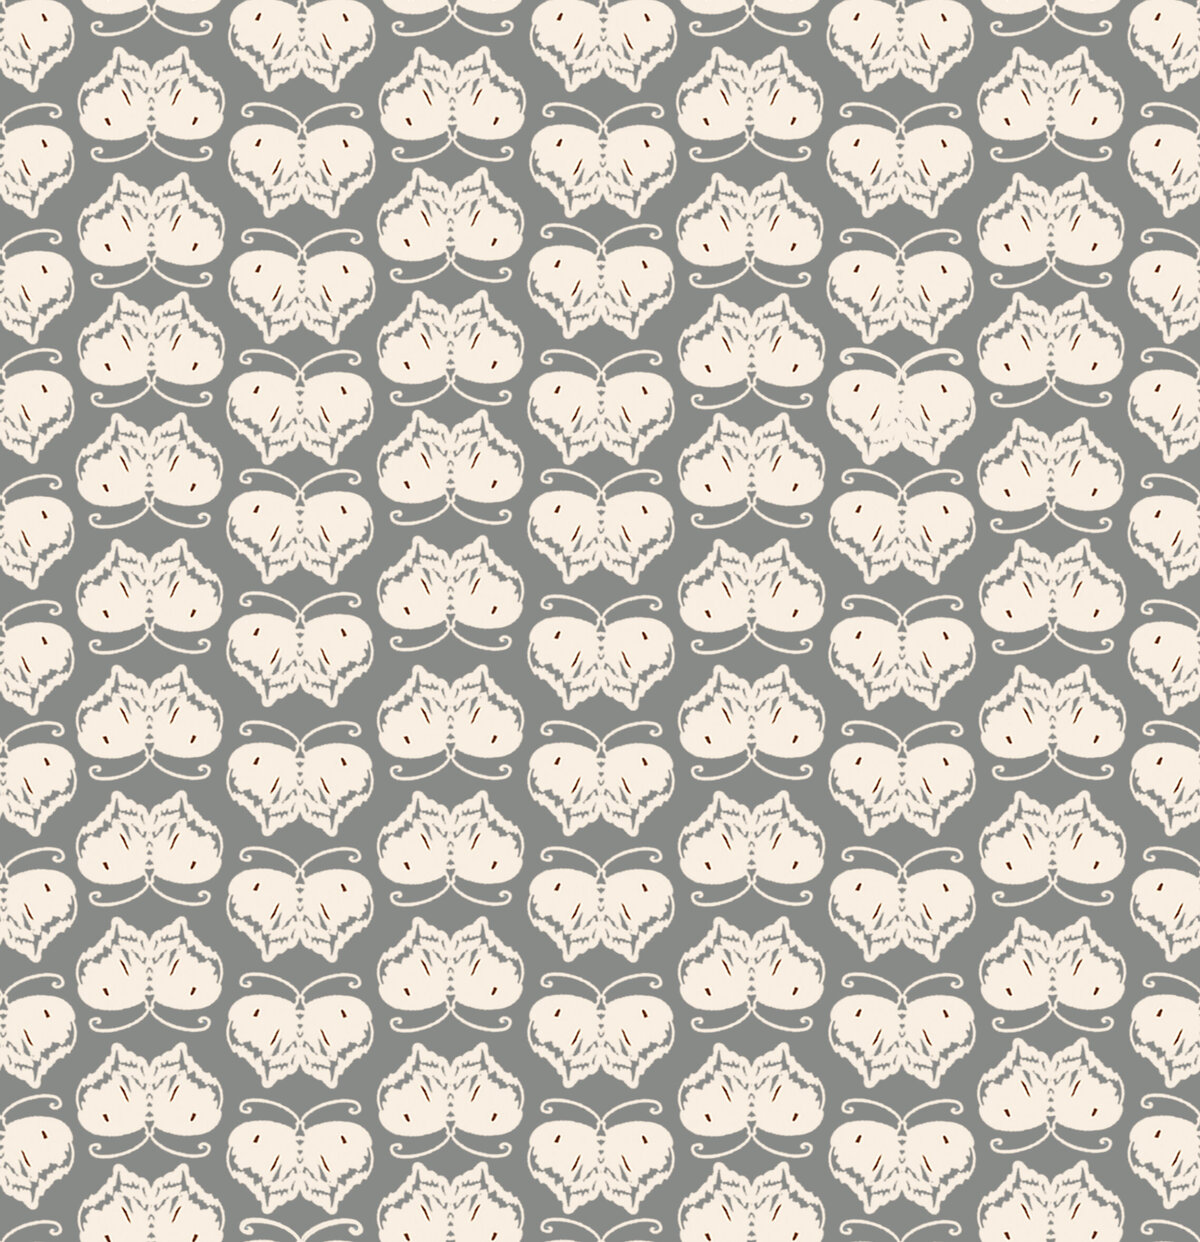 Butterfly Repeat Tile Greay - Deer Fiorella Design